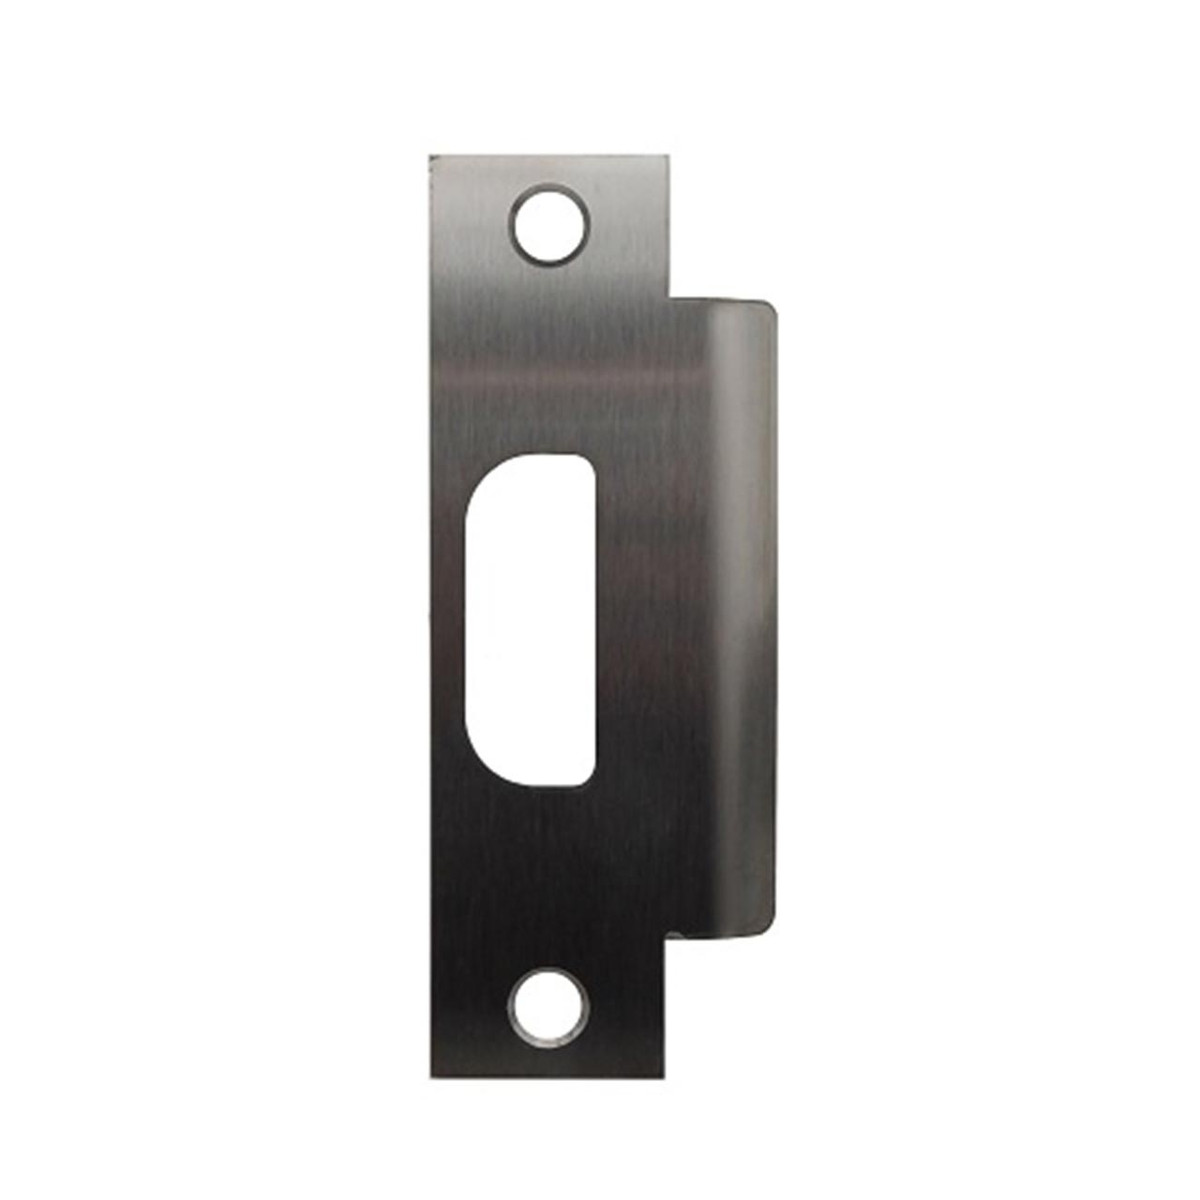 Don-Jo EH-161-630, Extended Height Latch Hole ASA Strike, 4-7/8" x 1-1/4", 630 Satin Stainless Steel